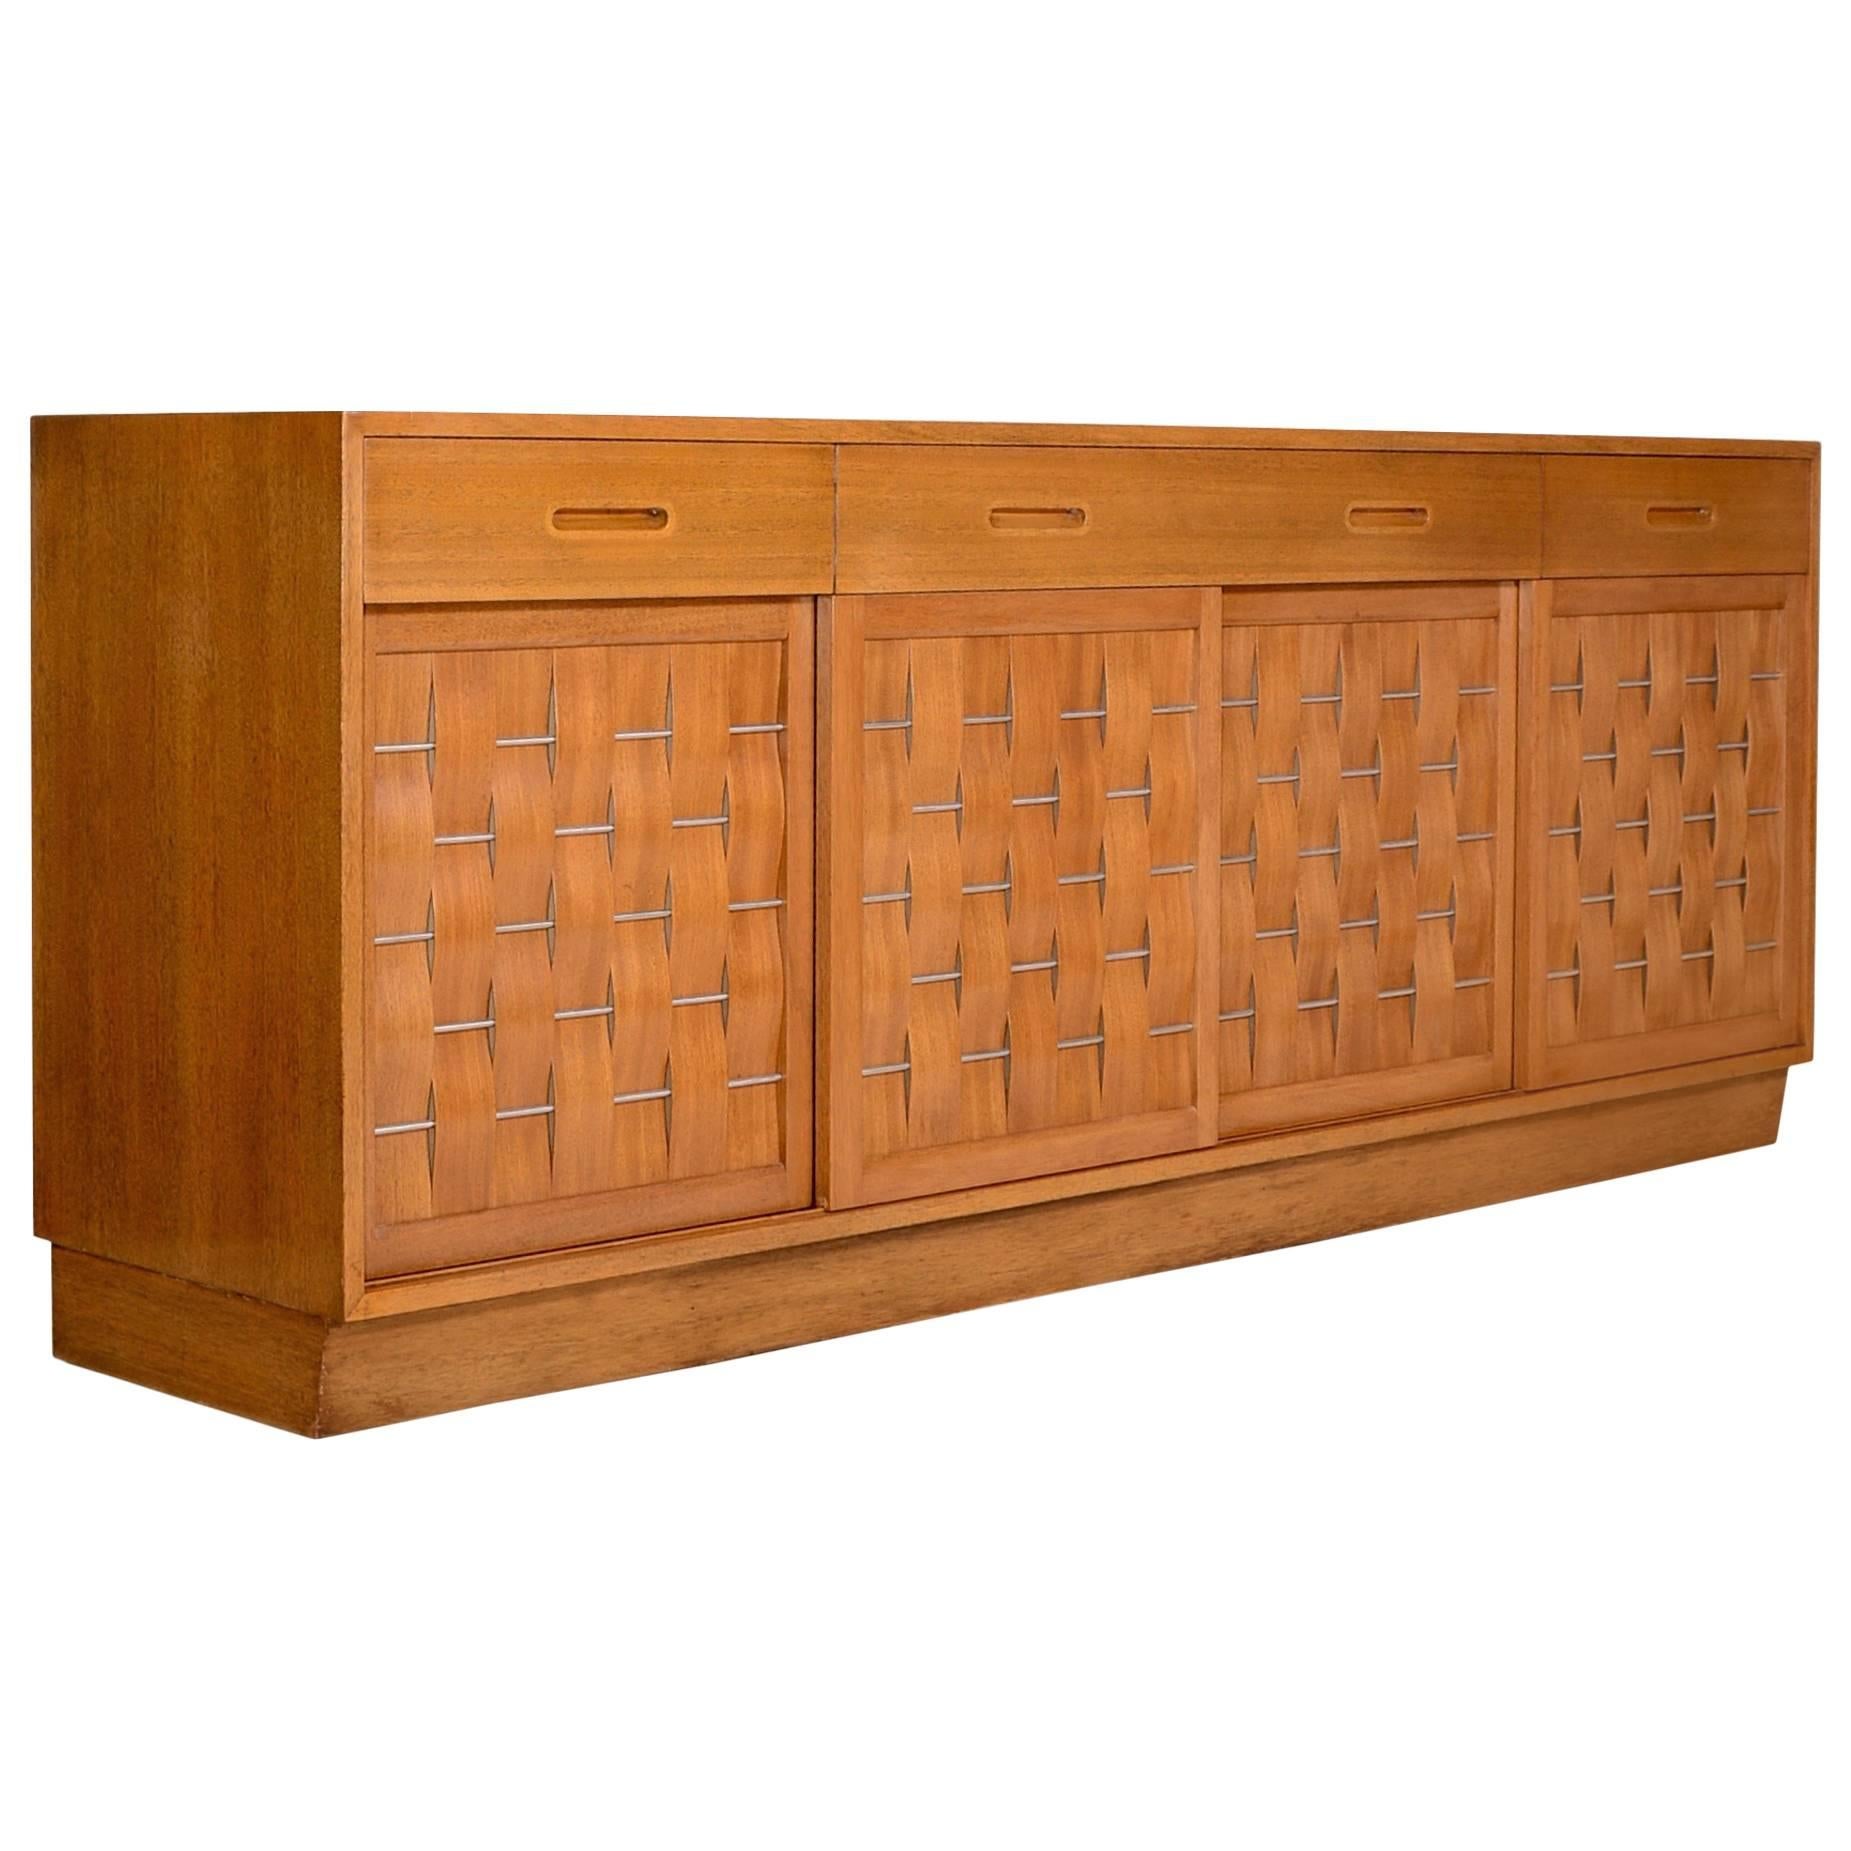 Mahogany Basket Weave Credenza by Edward Wormley for Dunbar For Sale